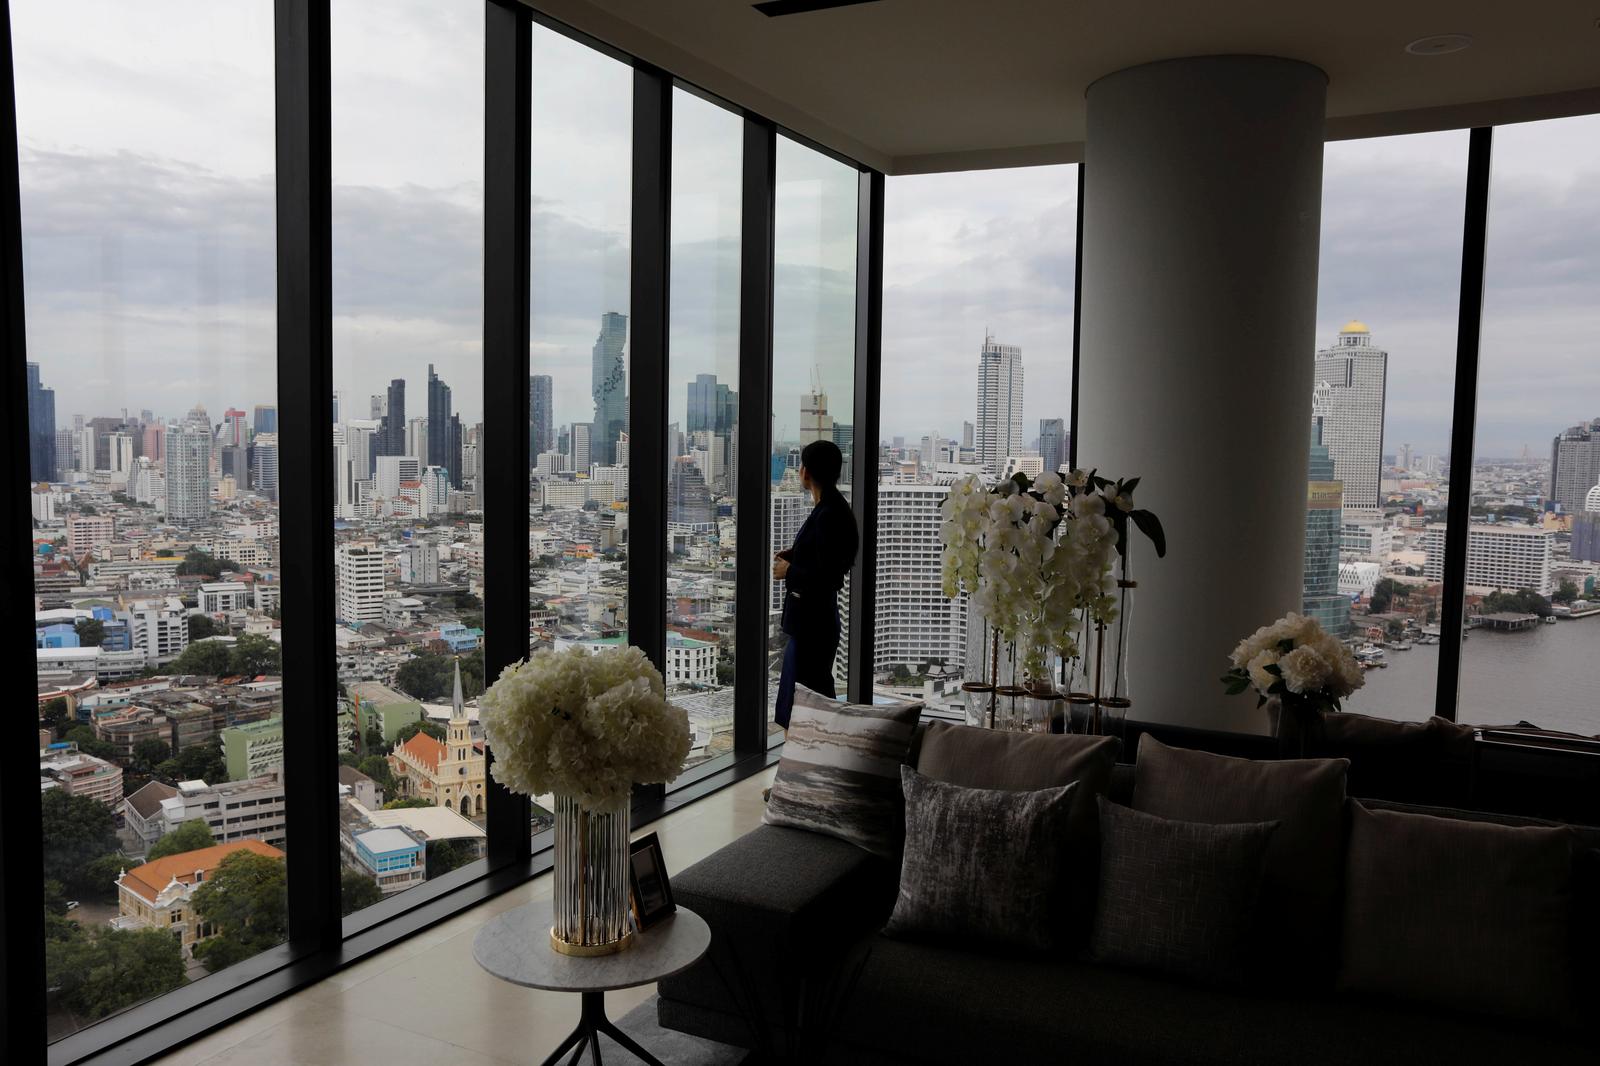 Lek, a saleswoman, looks through the window inside a luxury condo building next to the Chao Phraya river in Thon Buri, Bangkok, Thailand, August 23, 2019. Photo: Reuters